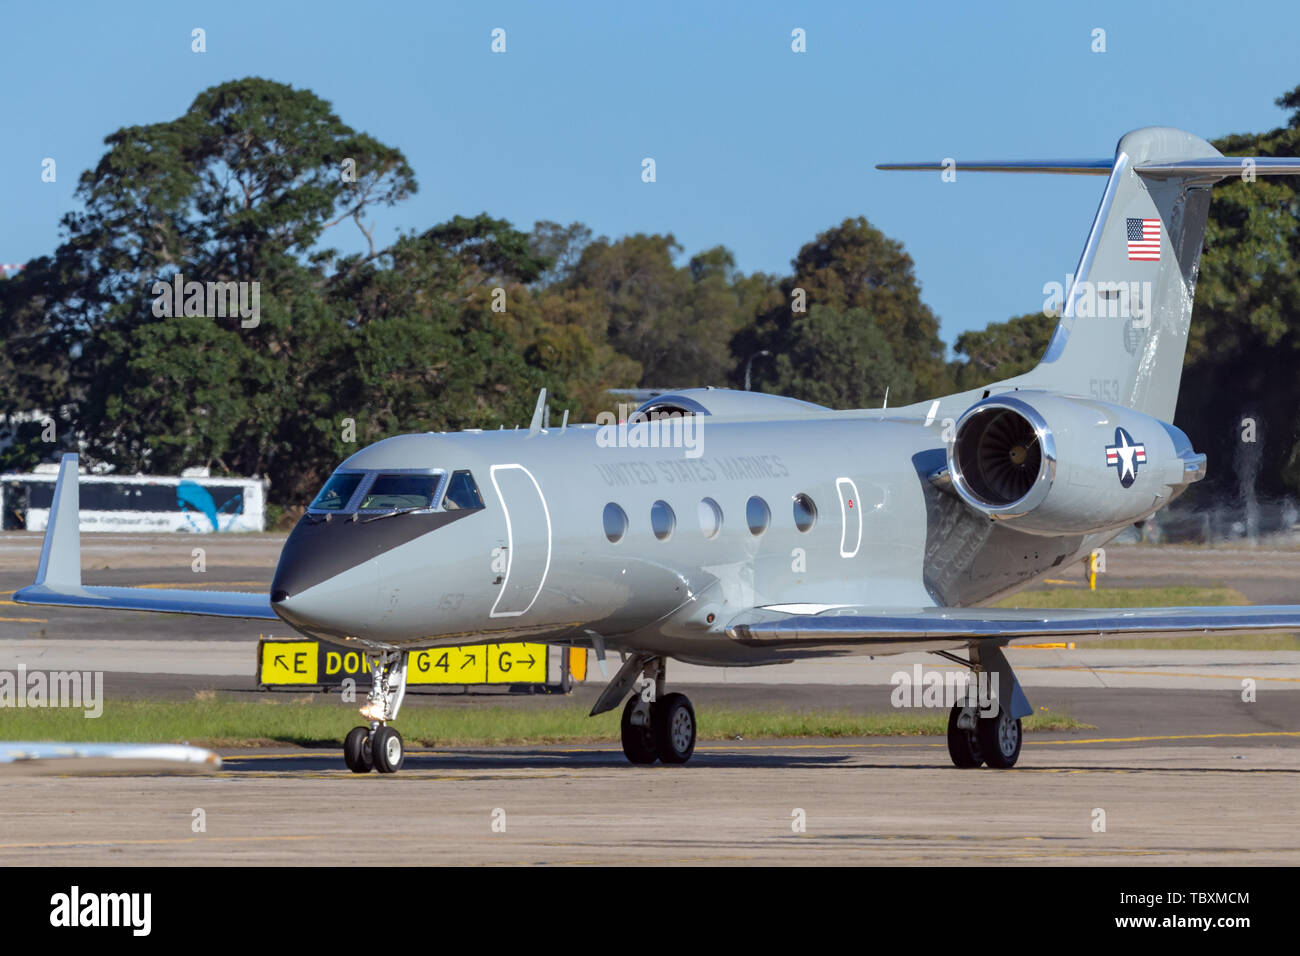 United States Marine Corps (USMC) C-20G 165153 taxiing at Sydney Airport. Stock Photo